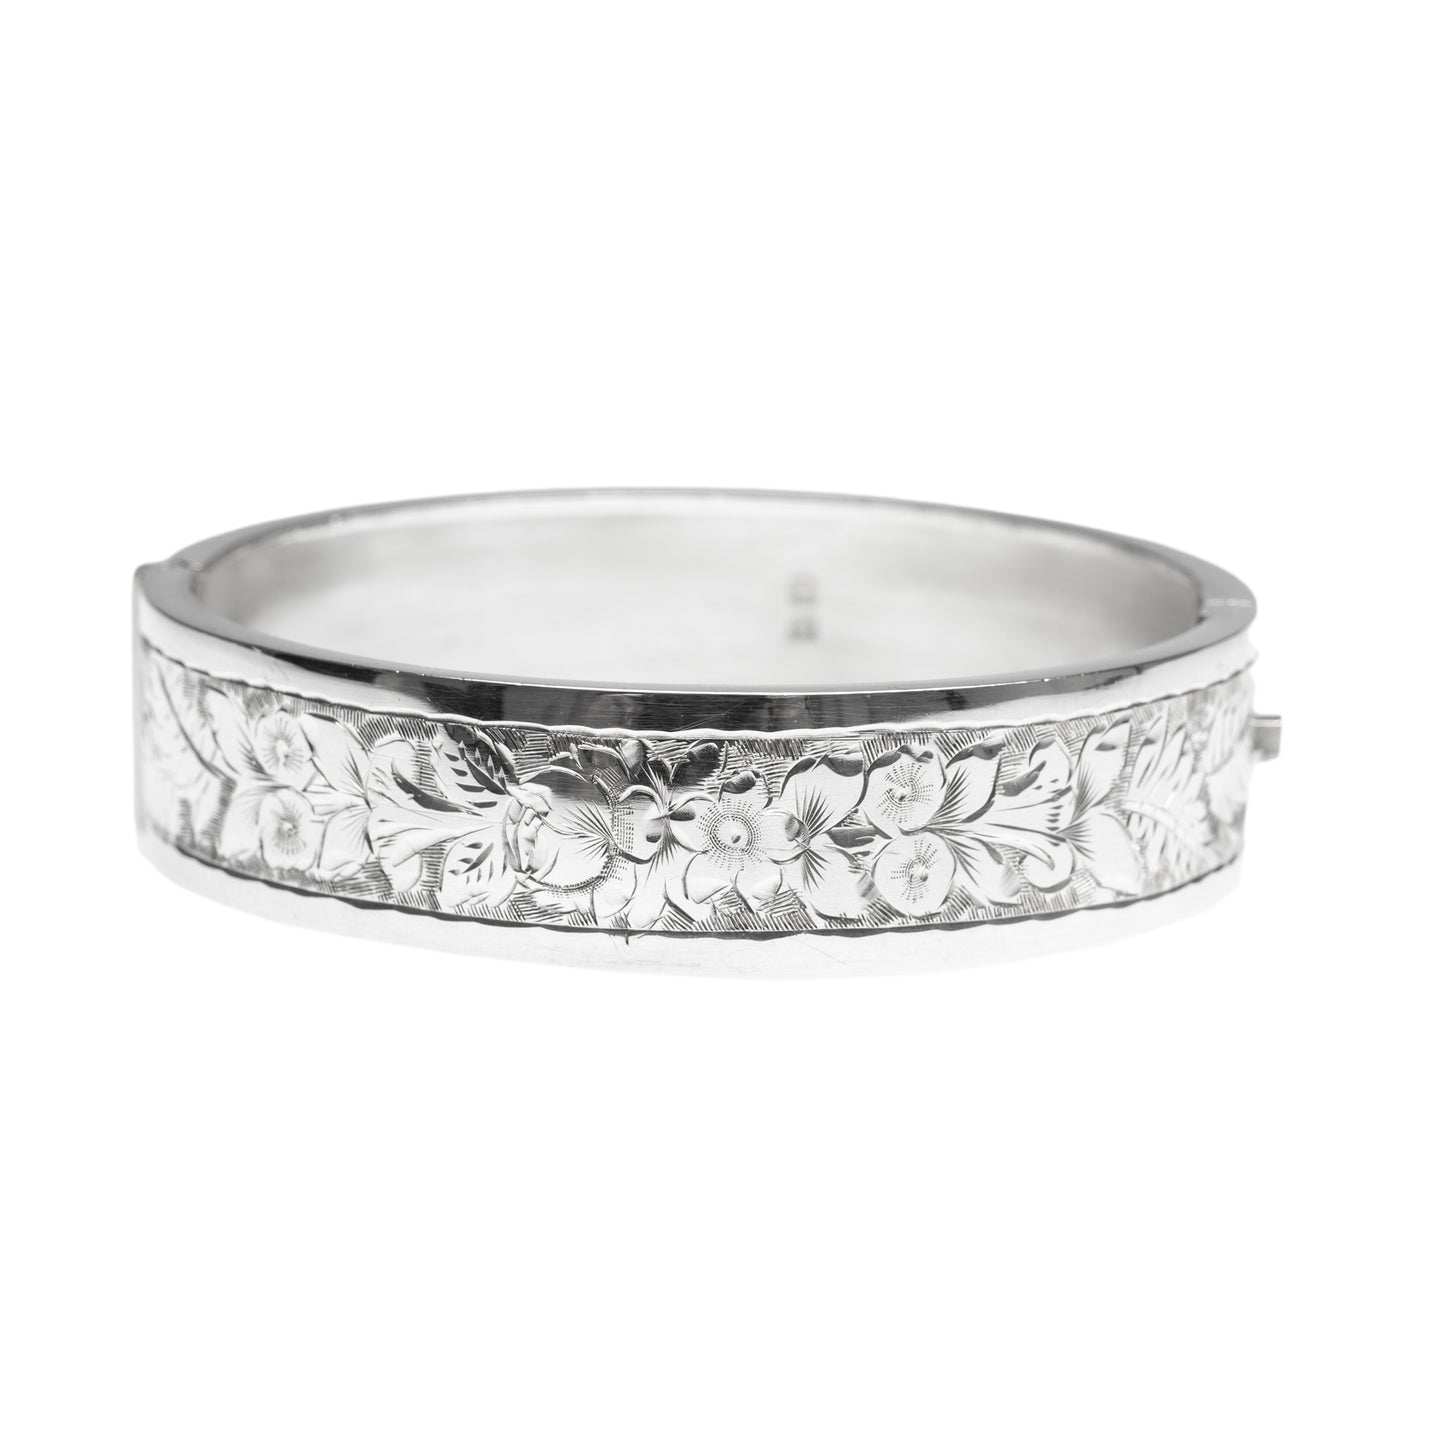 Antique Victorian Silver Hinged Bangle Bracelet Chased Floral Design Hallmarked 1885 (Code A420)